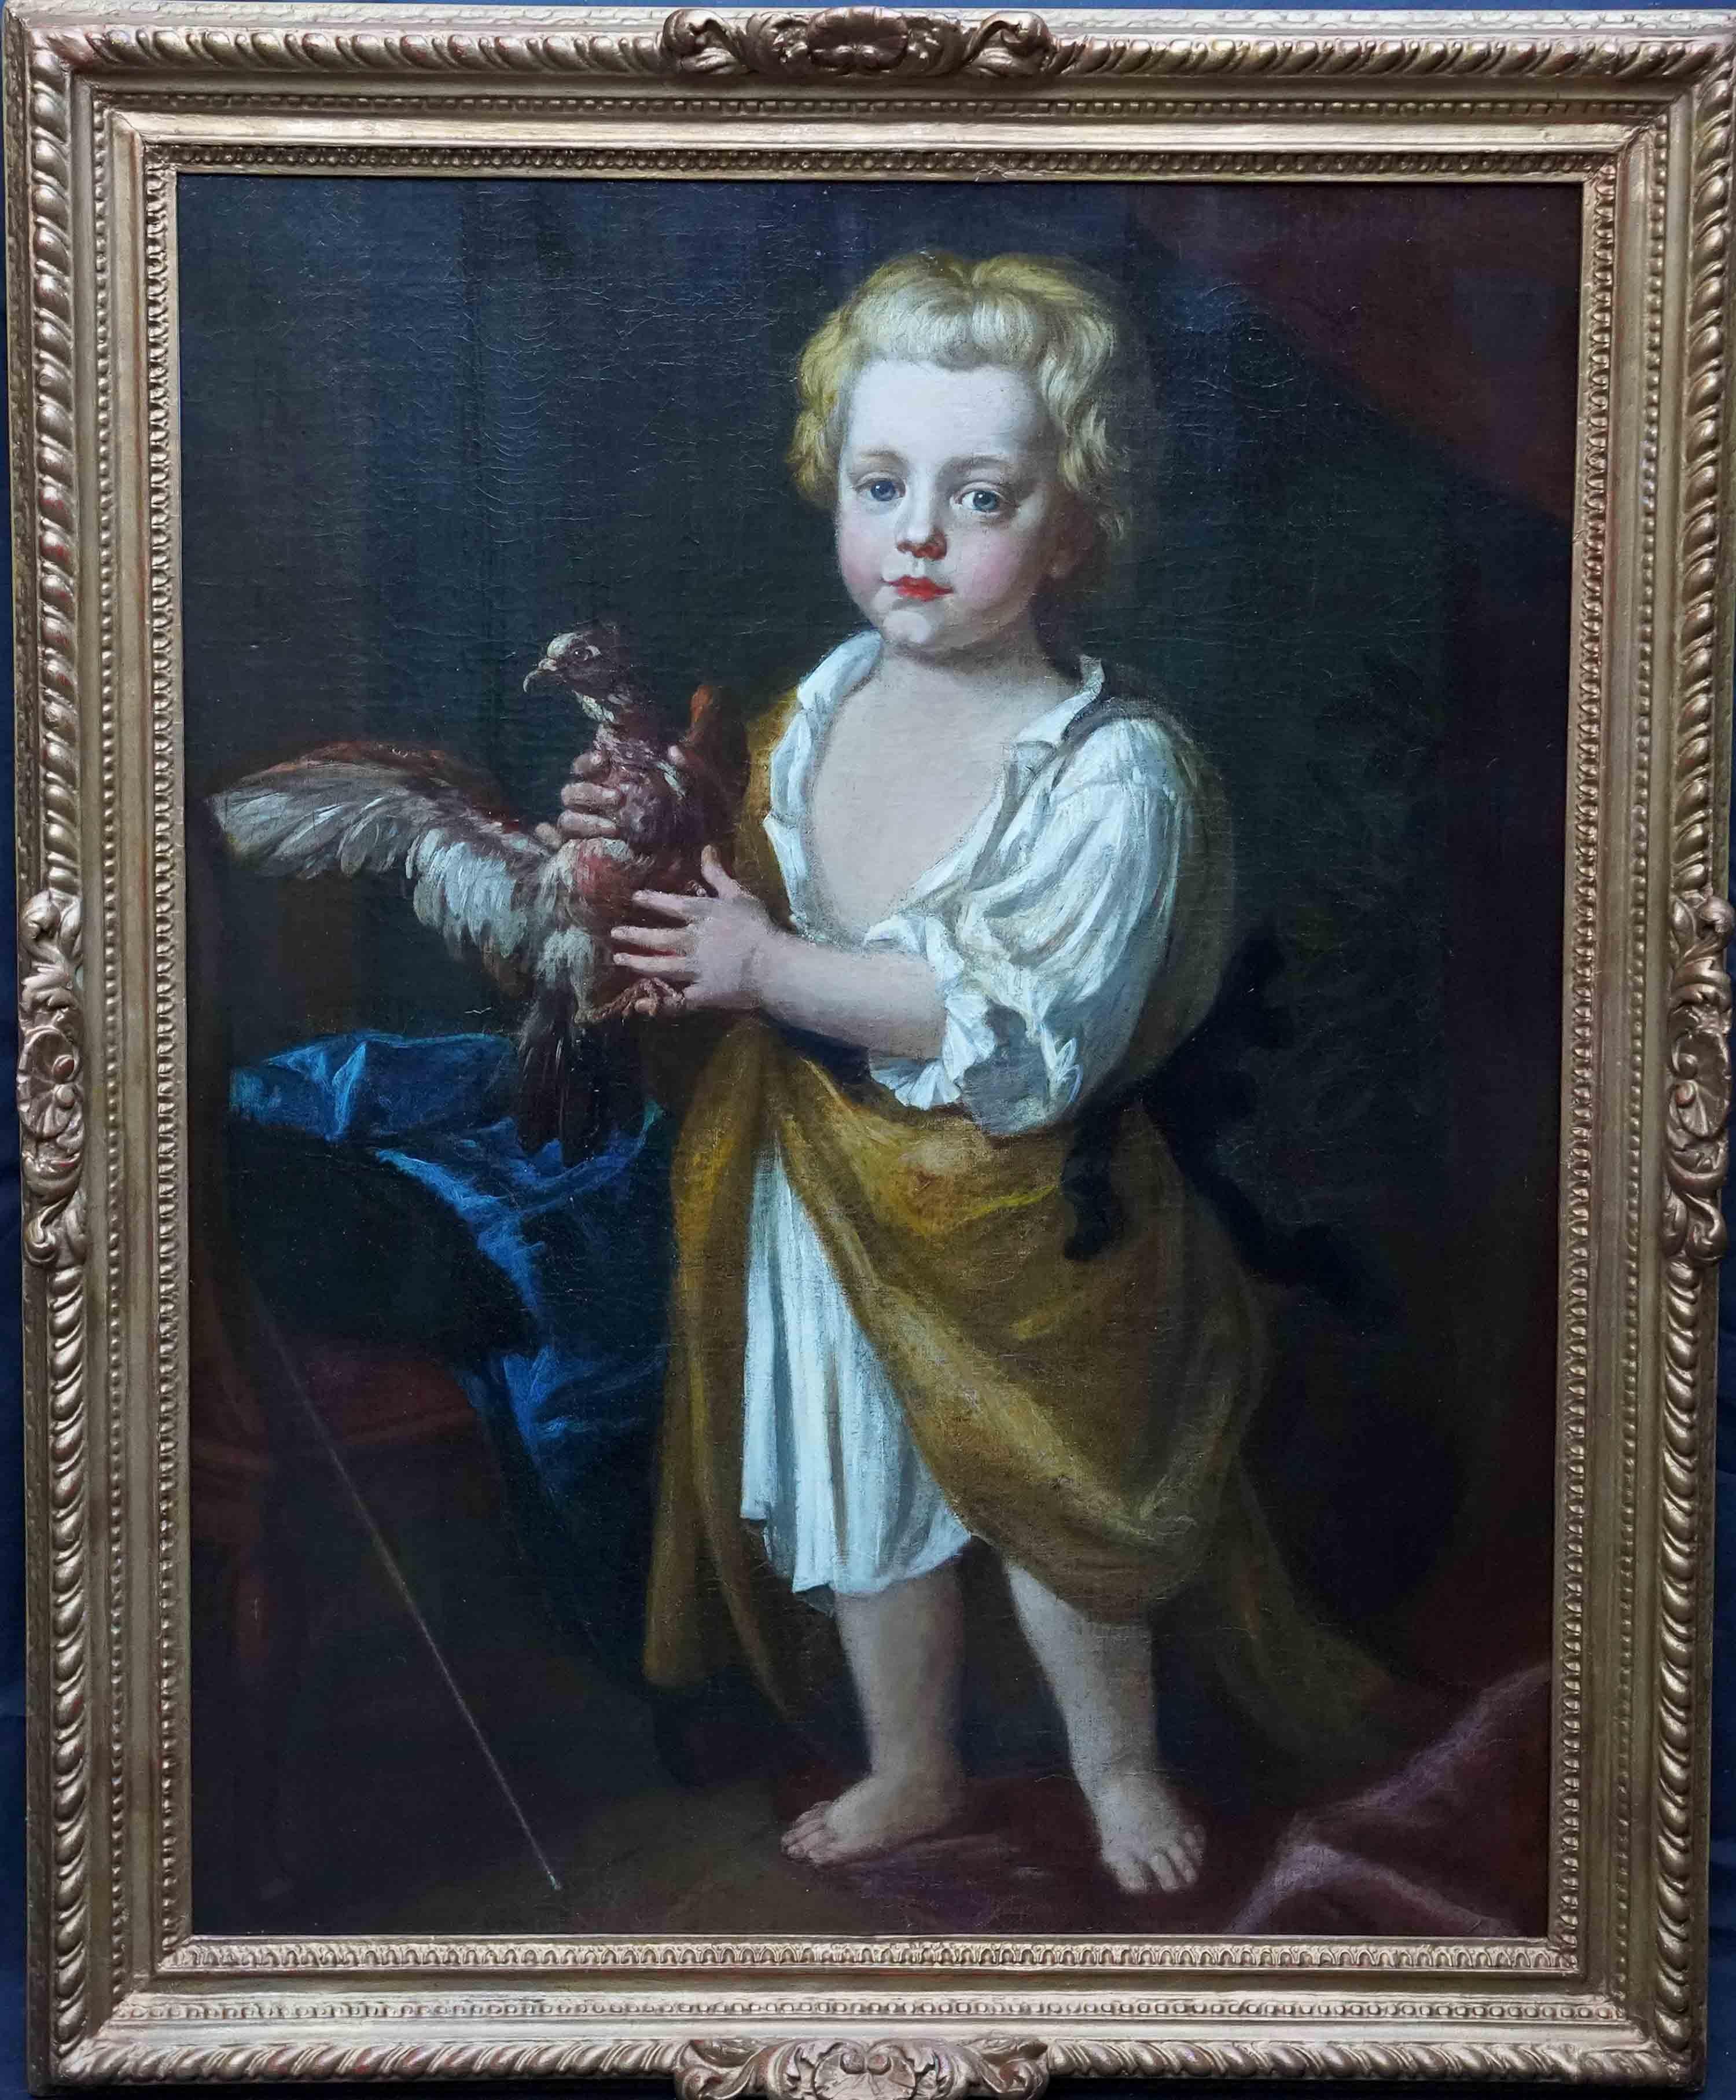 Portrait of a Boy with Bird - British 17th century art Old Master oil painting For Sale 8